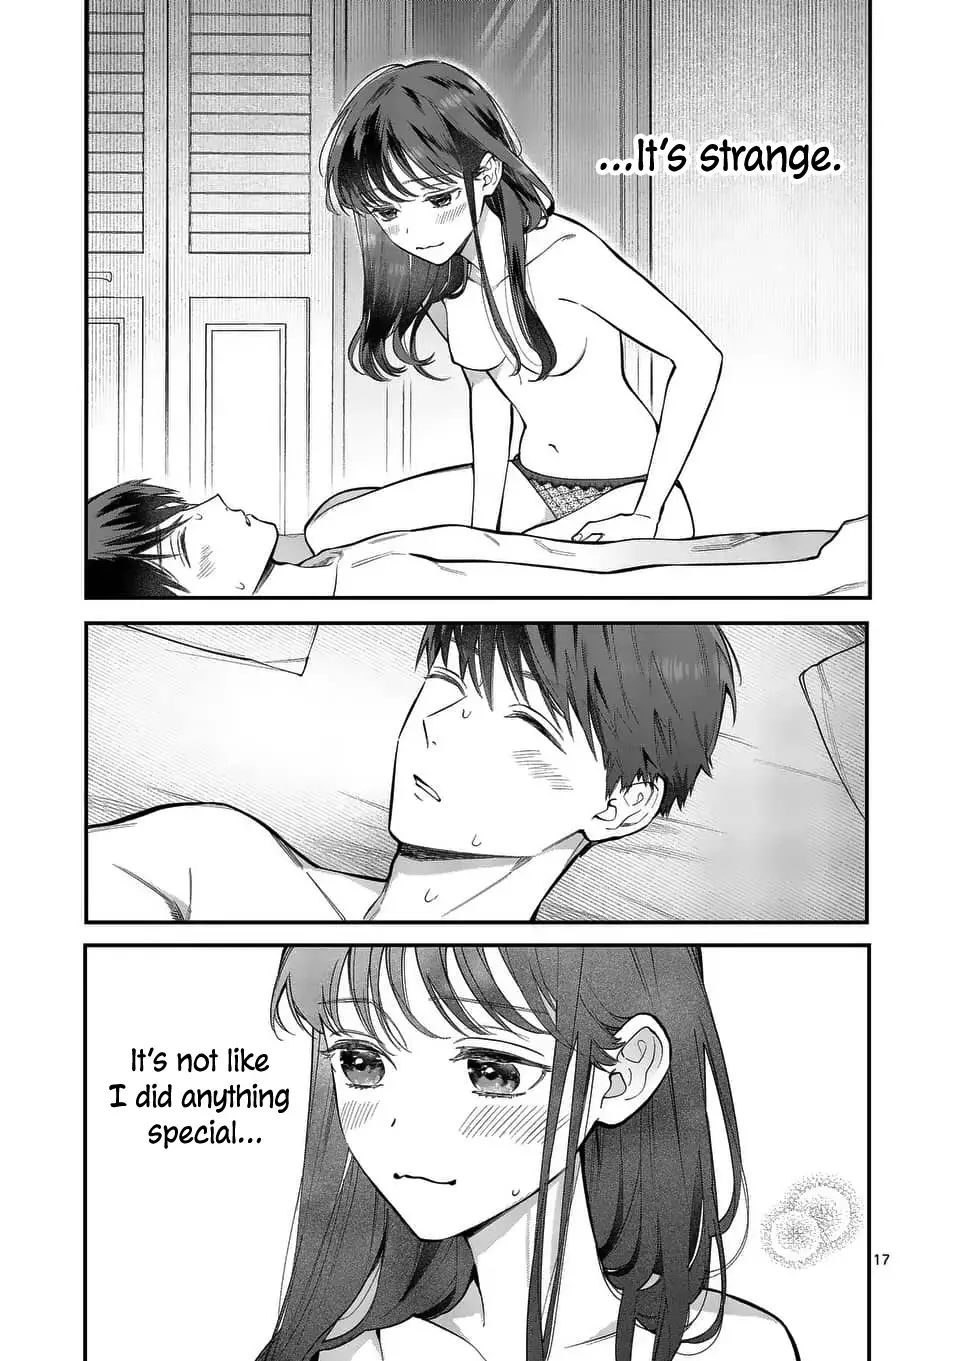 Is It Wrong To Get Done By A Girl? - 12.2 page 3